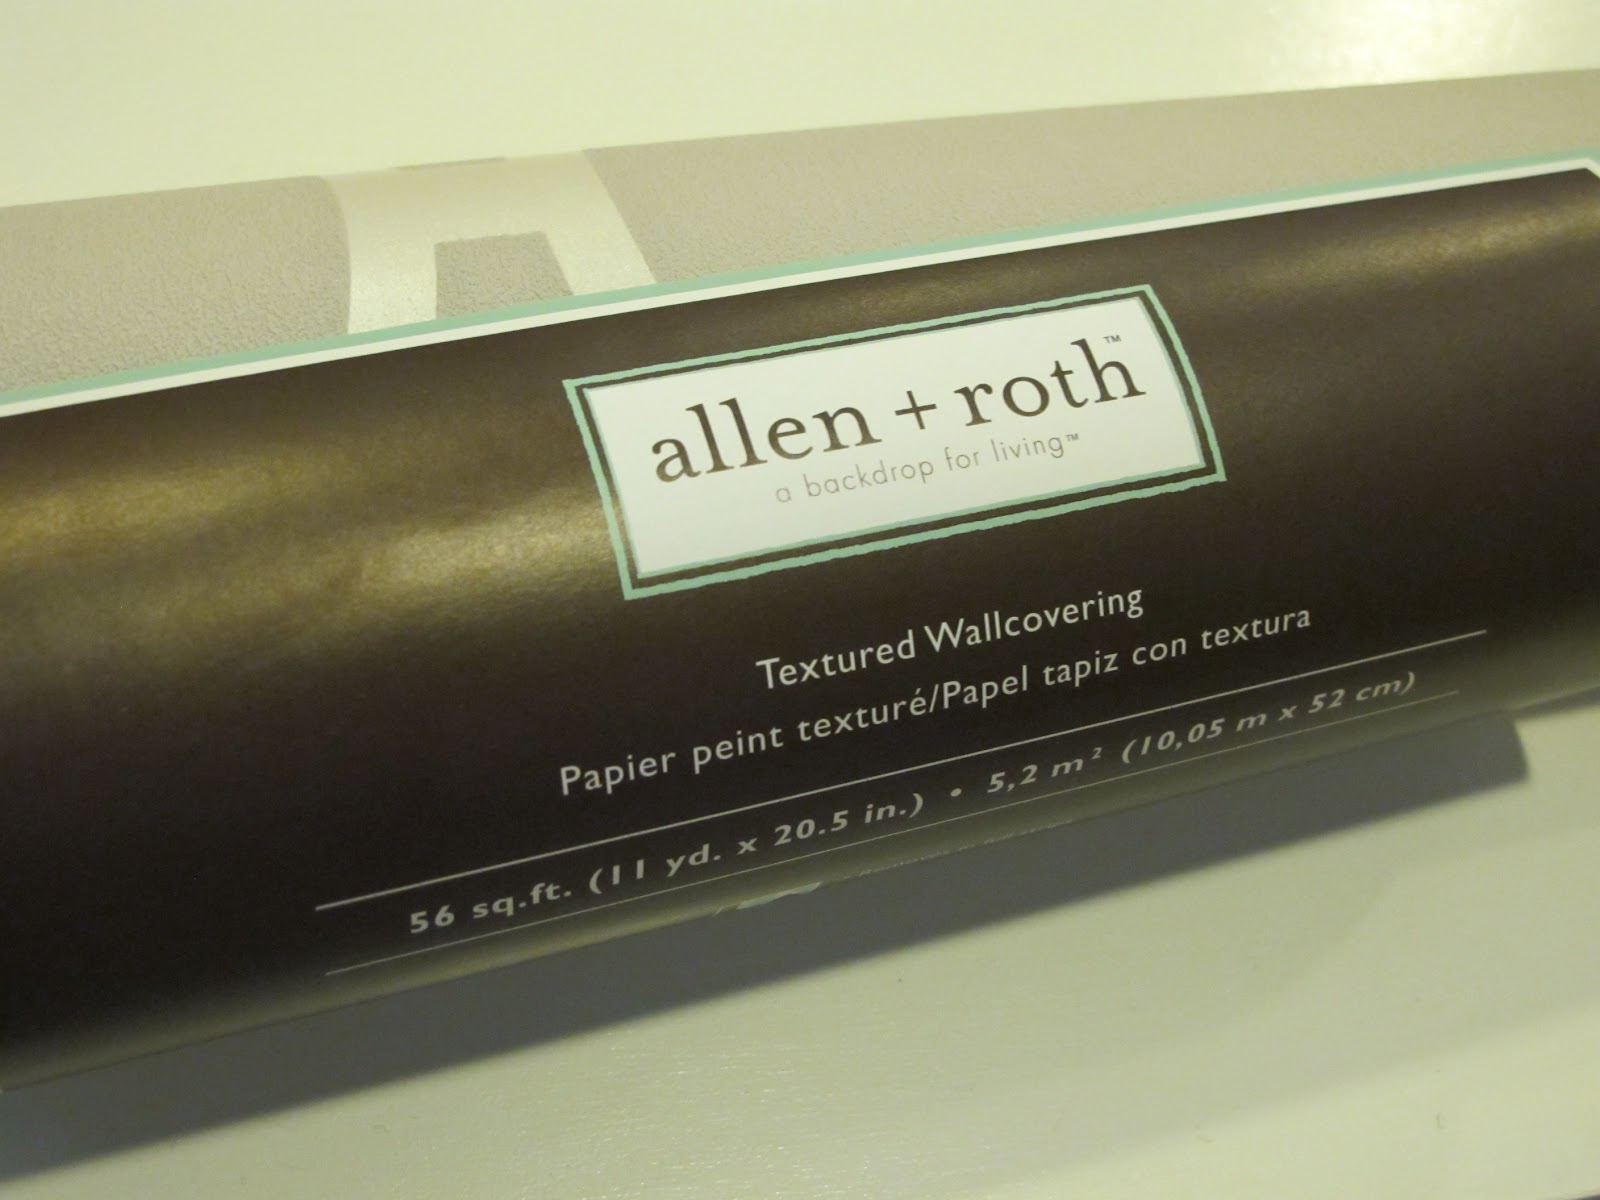 ... was a roll of $20 Allen + Roth Spanish Tile Pattern paper from Lowes